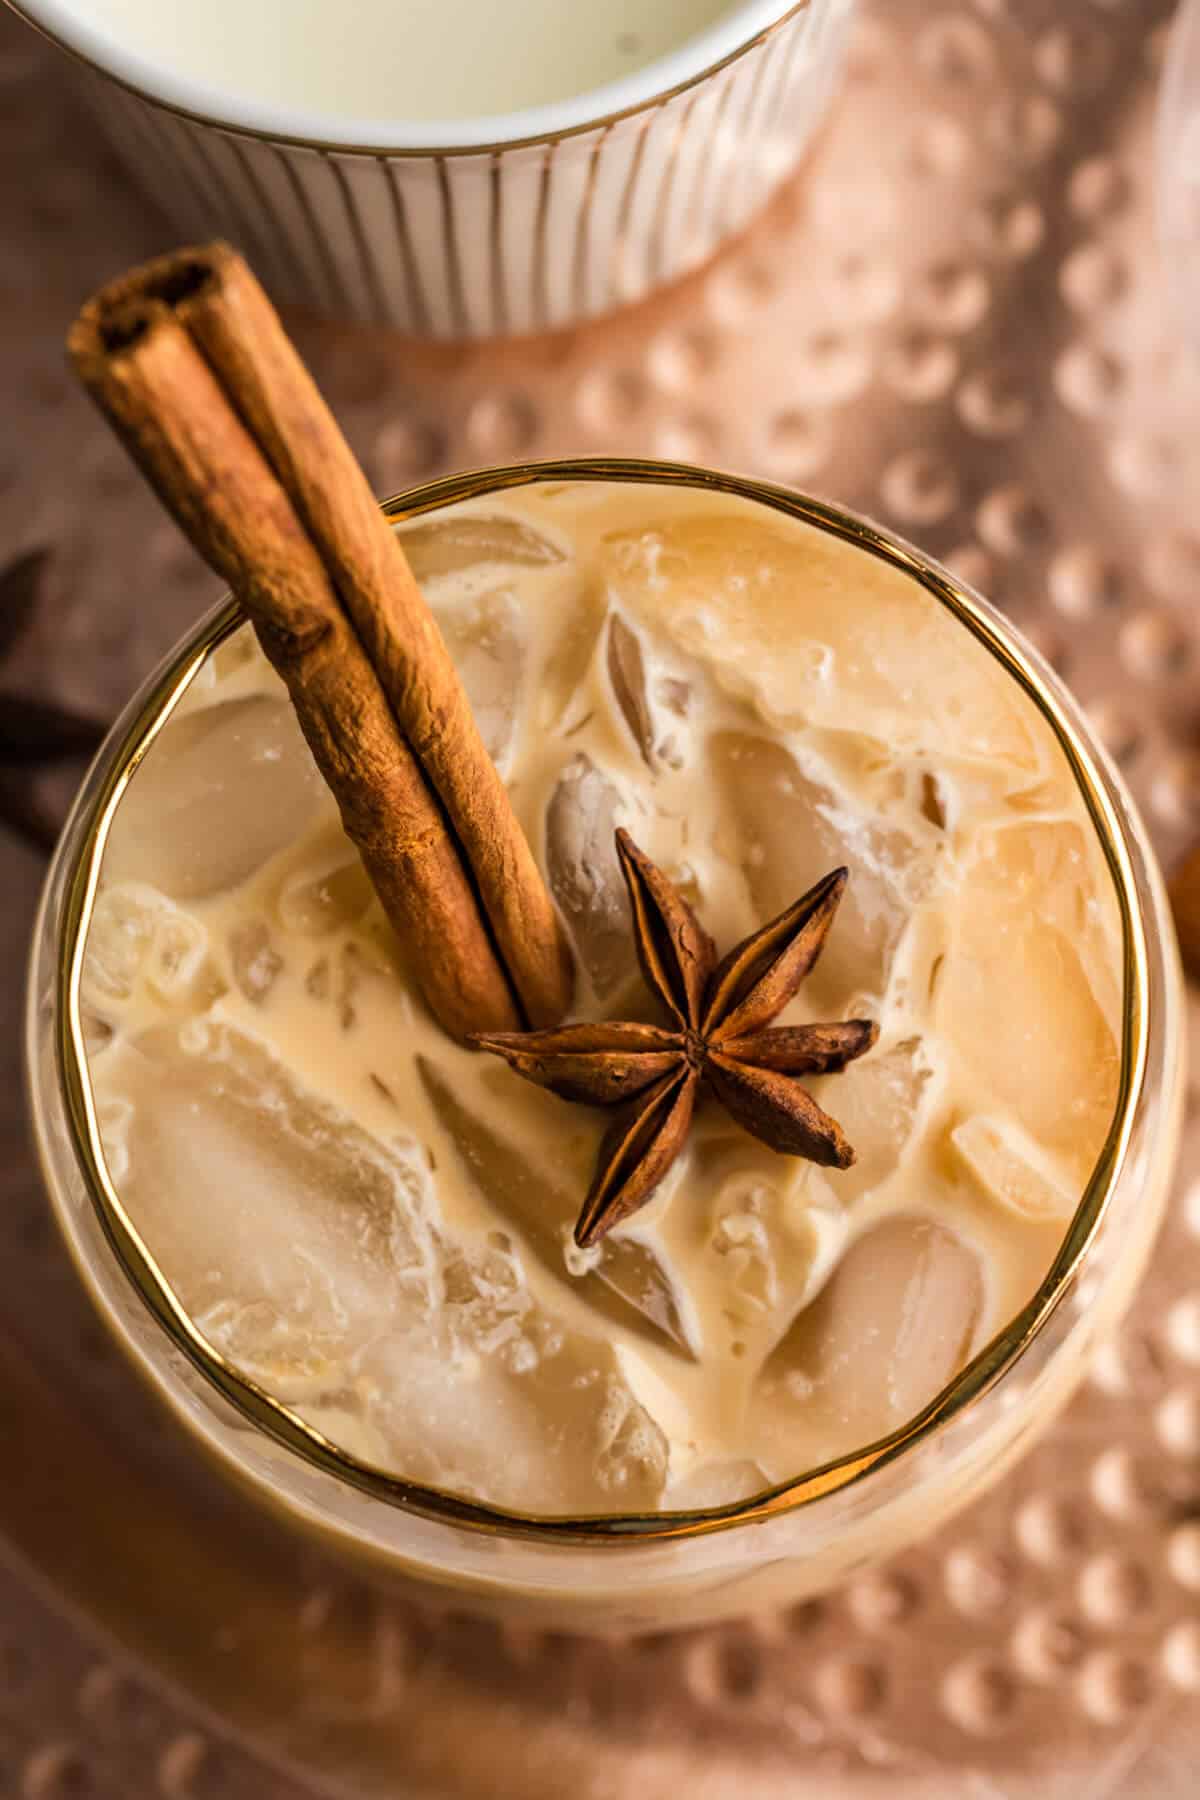 Overhead view of a virgin Gingerbread White Russian in a gold rimmed cocktail glass garnished with a cinnamon stick and a whole star anise.